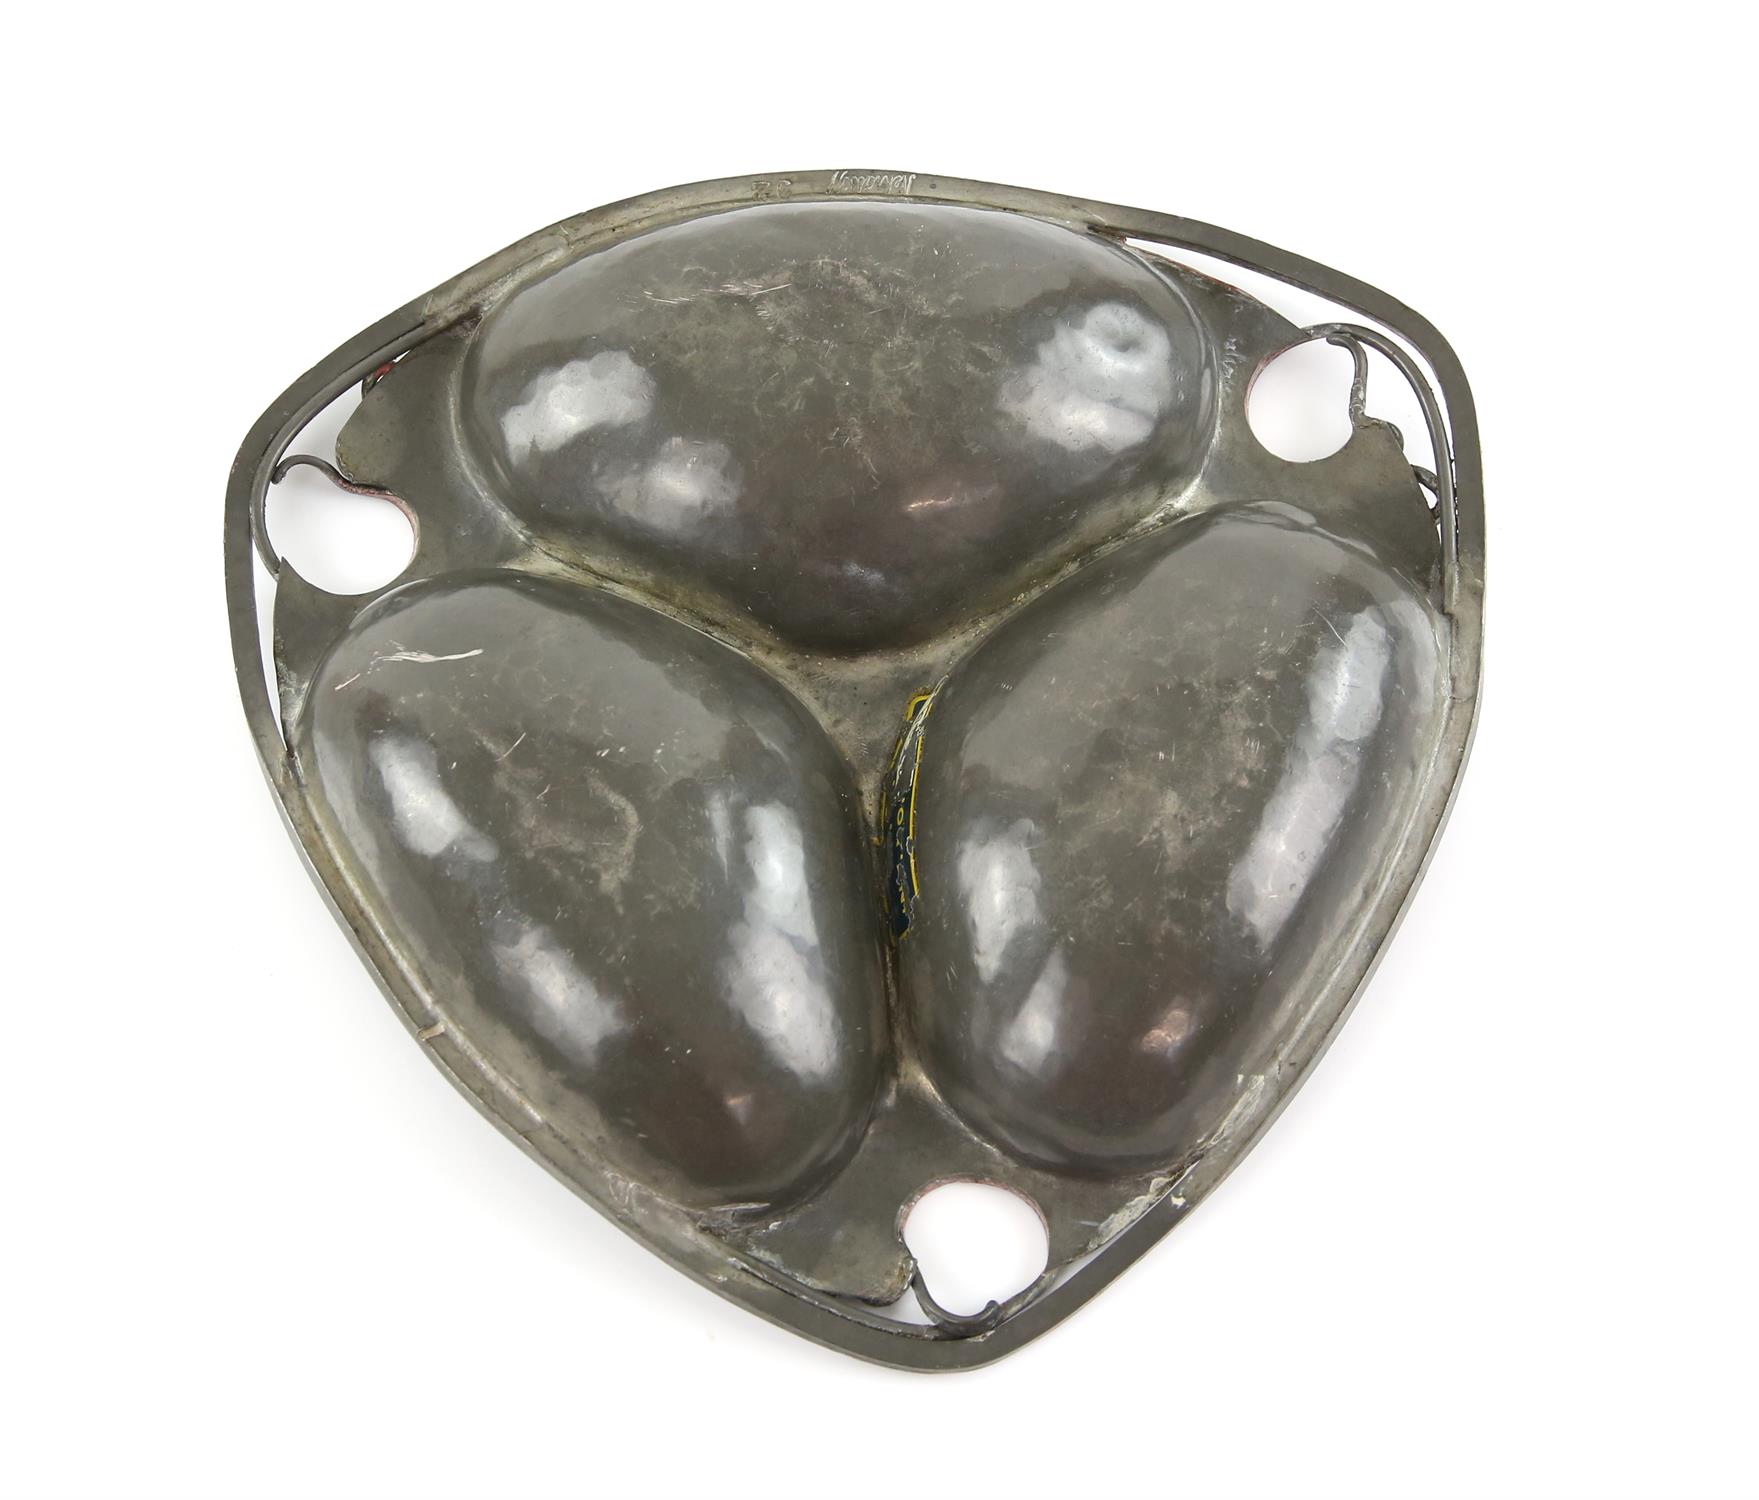 Serge Nekrassoff (Russian-American, 1895-1985), Art Nouveau style pewter hors d'oeuvres dish, - Image 2 of 3